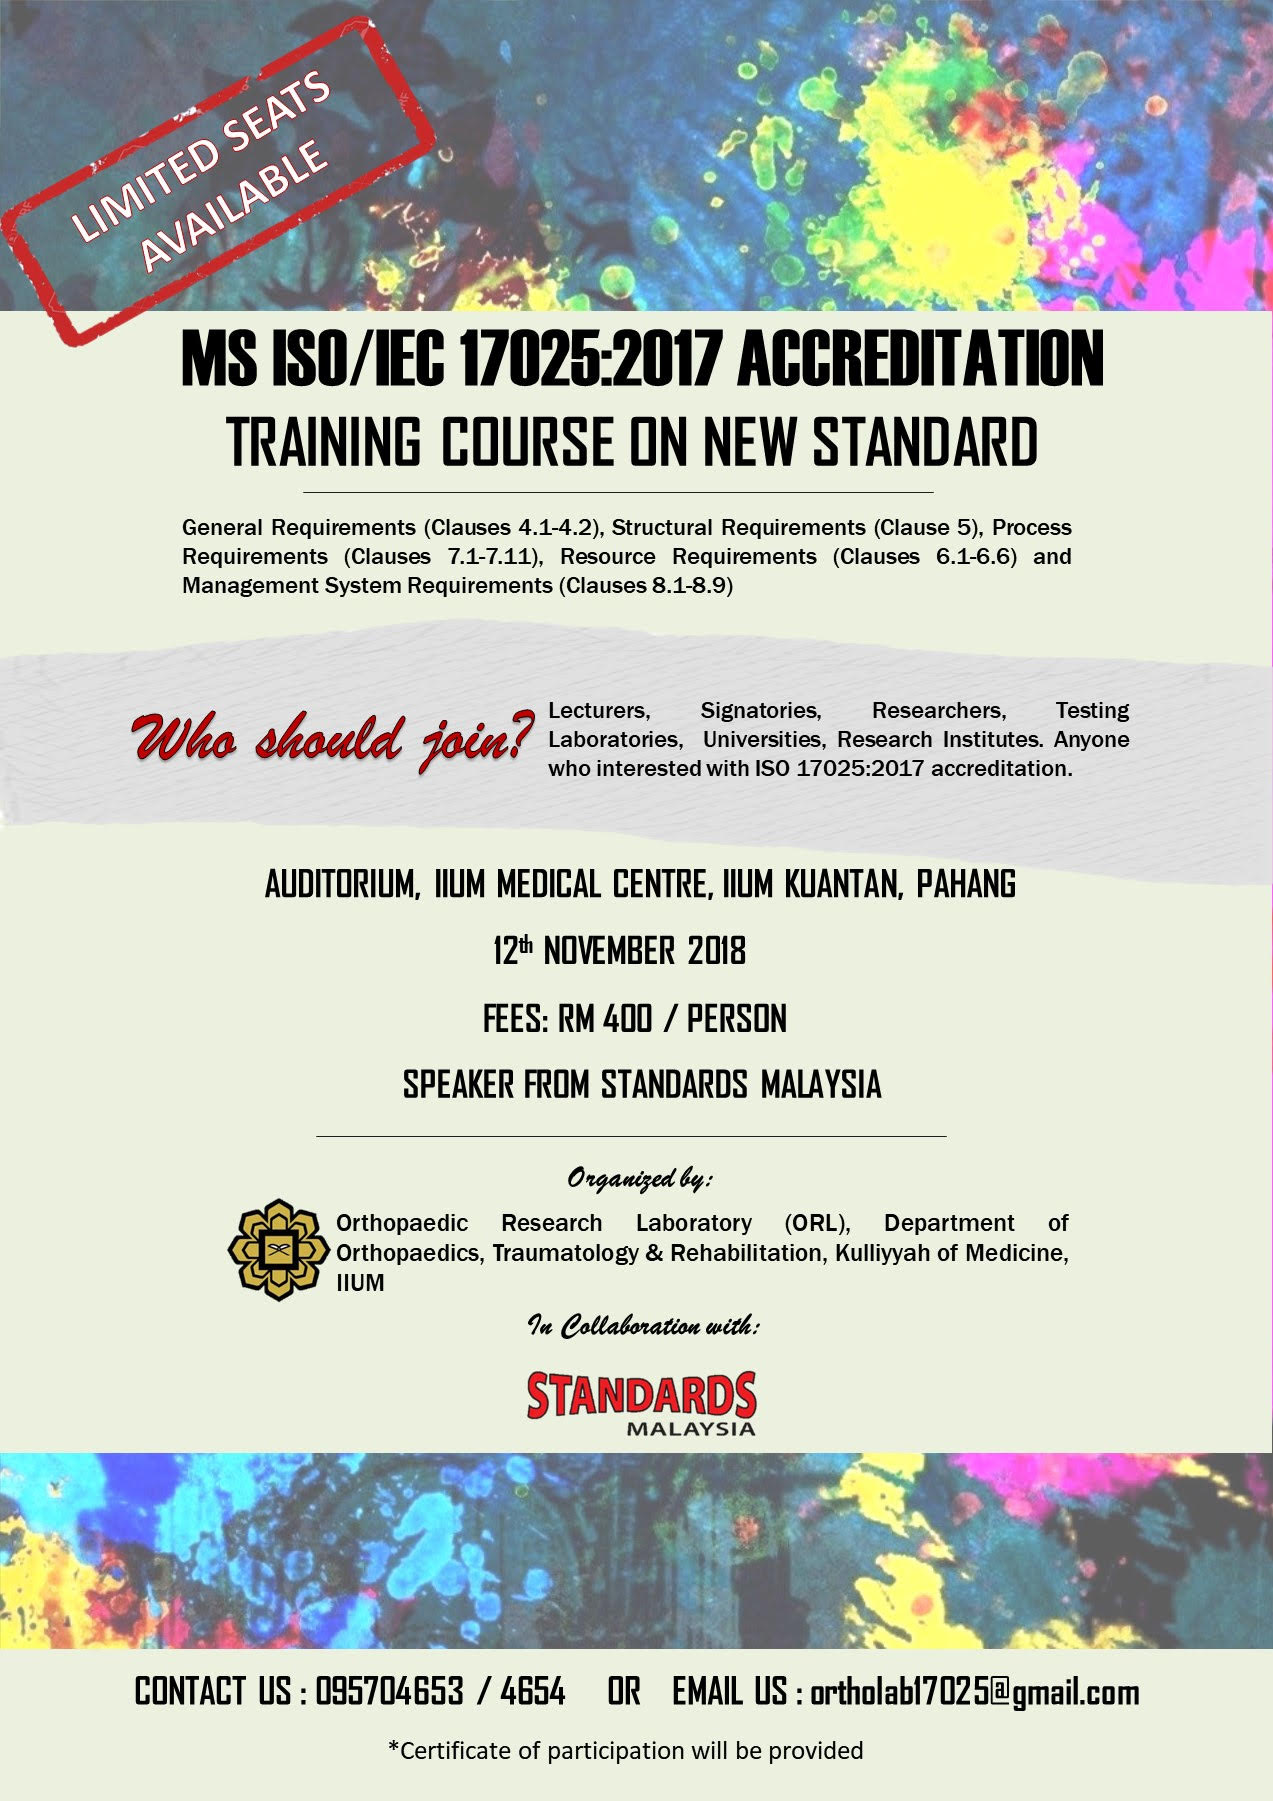 Invitation to "MS ISO/IEC 17025:2017 ACCREDITATION; TRAINING COURSE ON NEW STANDARD"